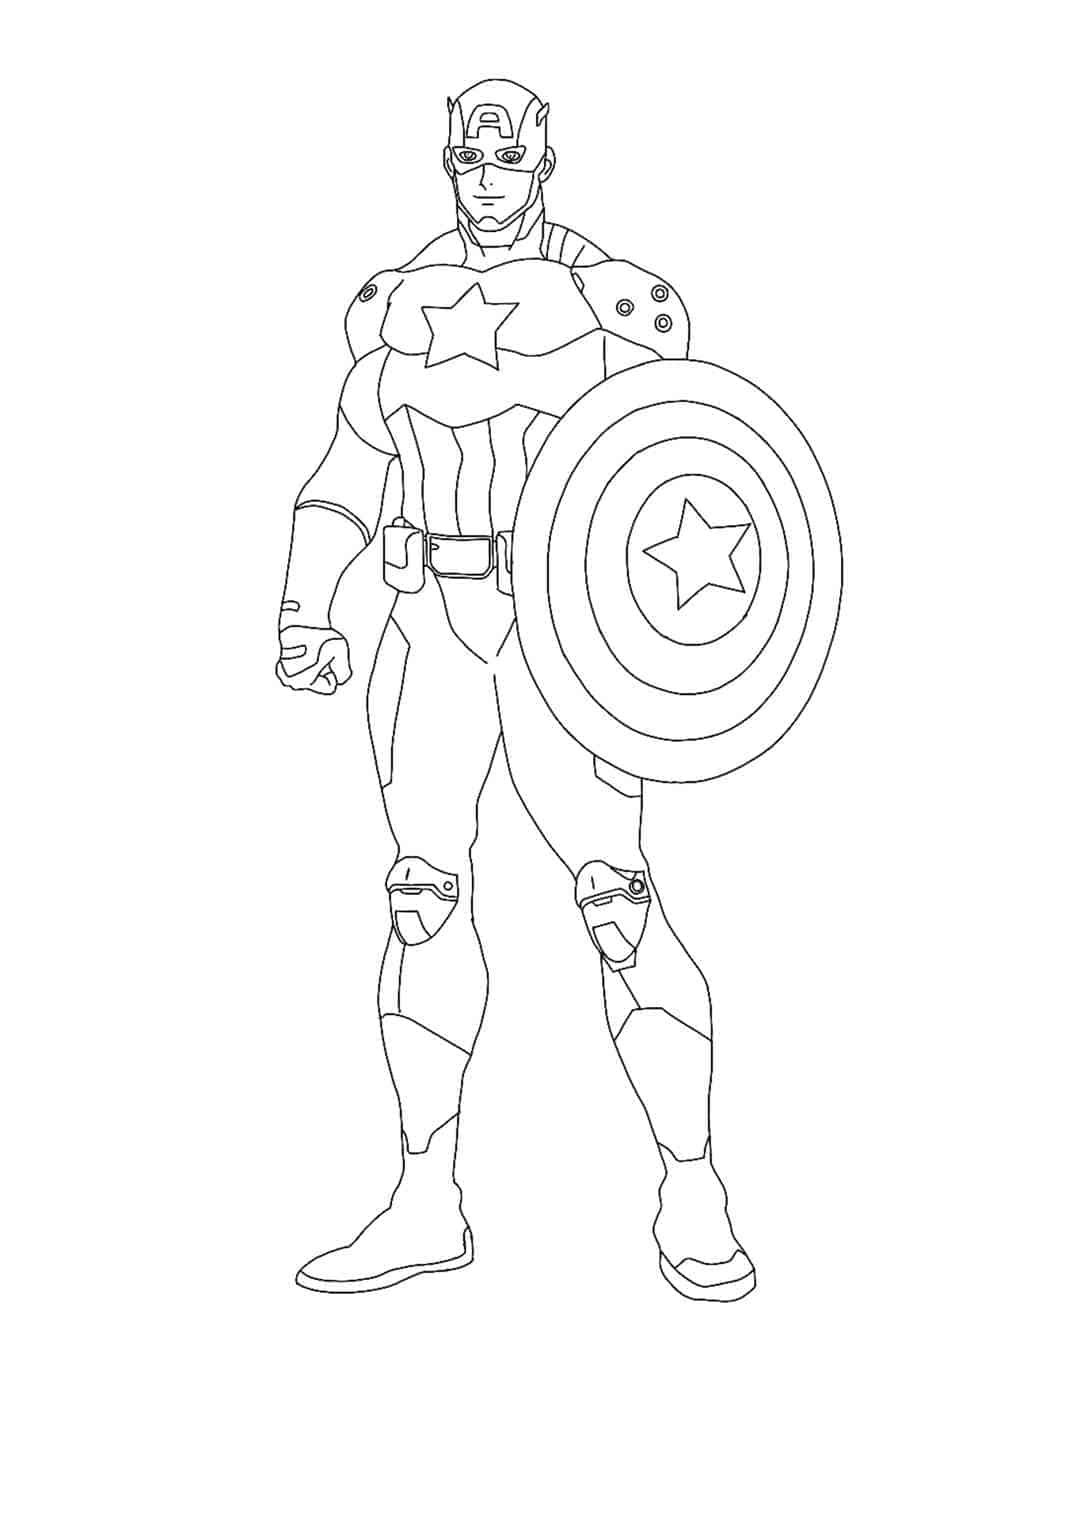 Captain America with shield coloring sheet